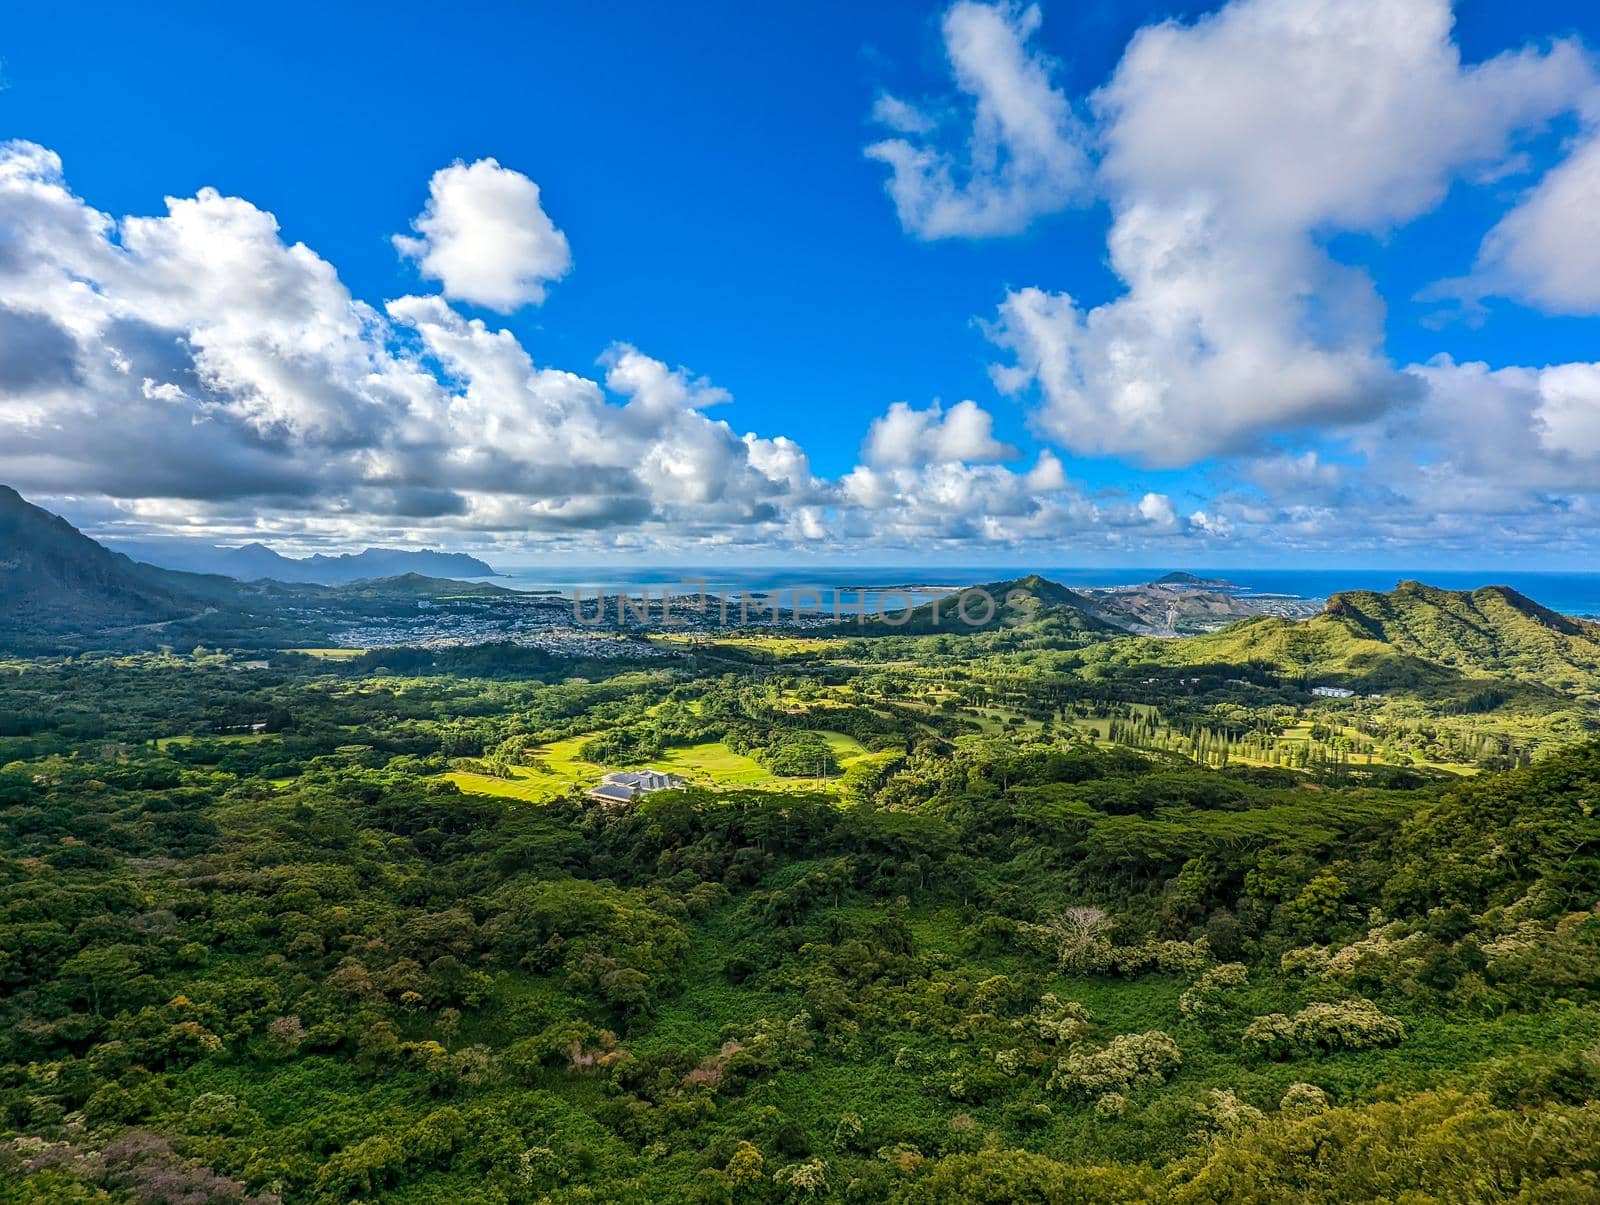 pali look out with beautiful views in oahu hawaii by digidreamgrafix